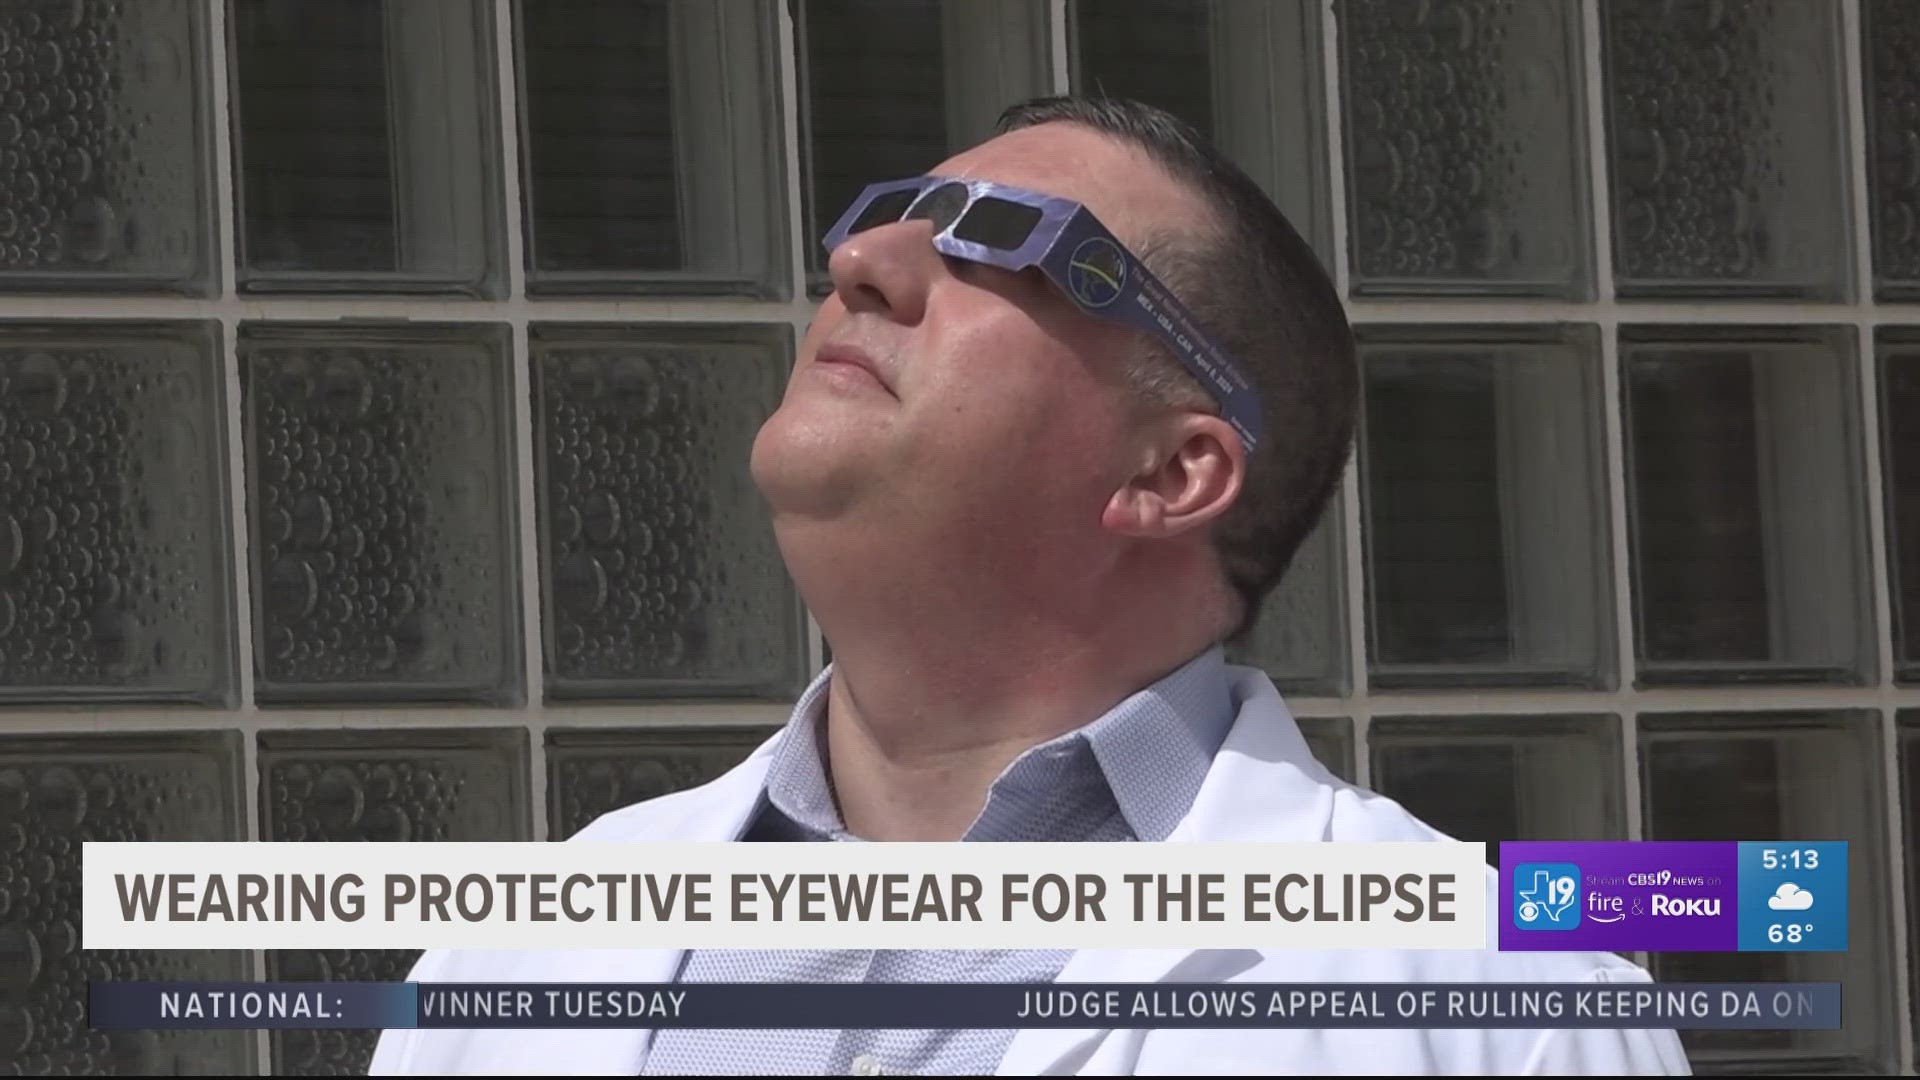 The countdown for the eclipse is on, and with Tyler right in the path, it’s important to make sure you’re able to view it safely.